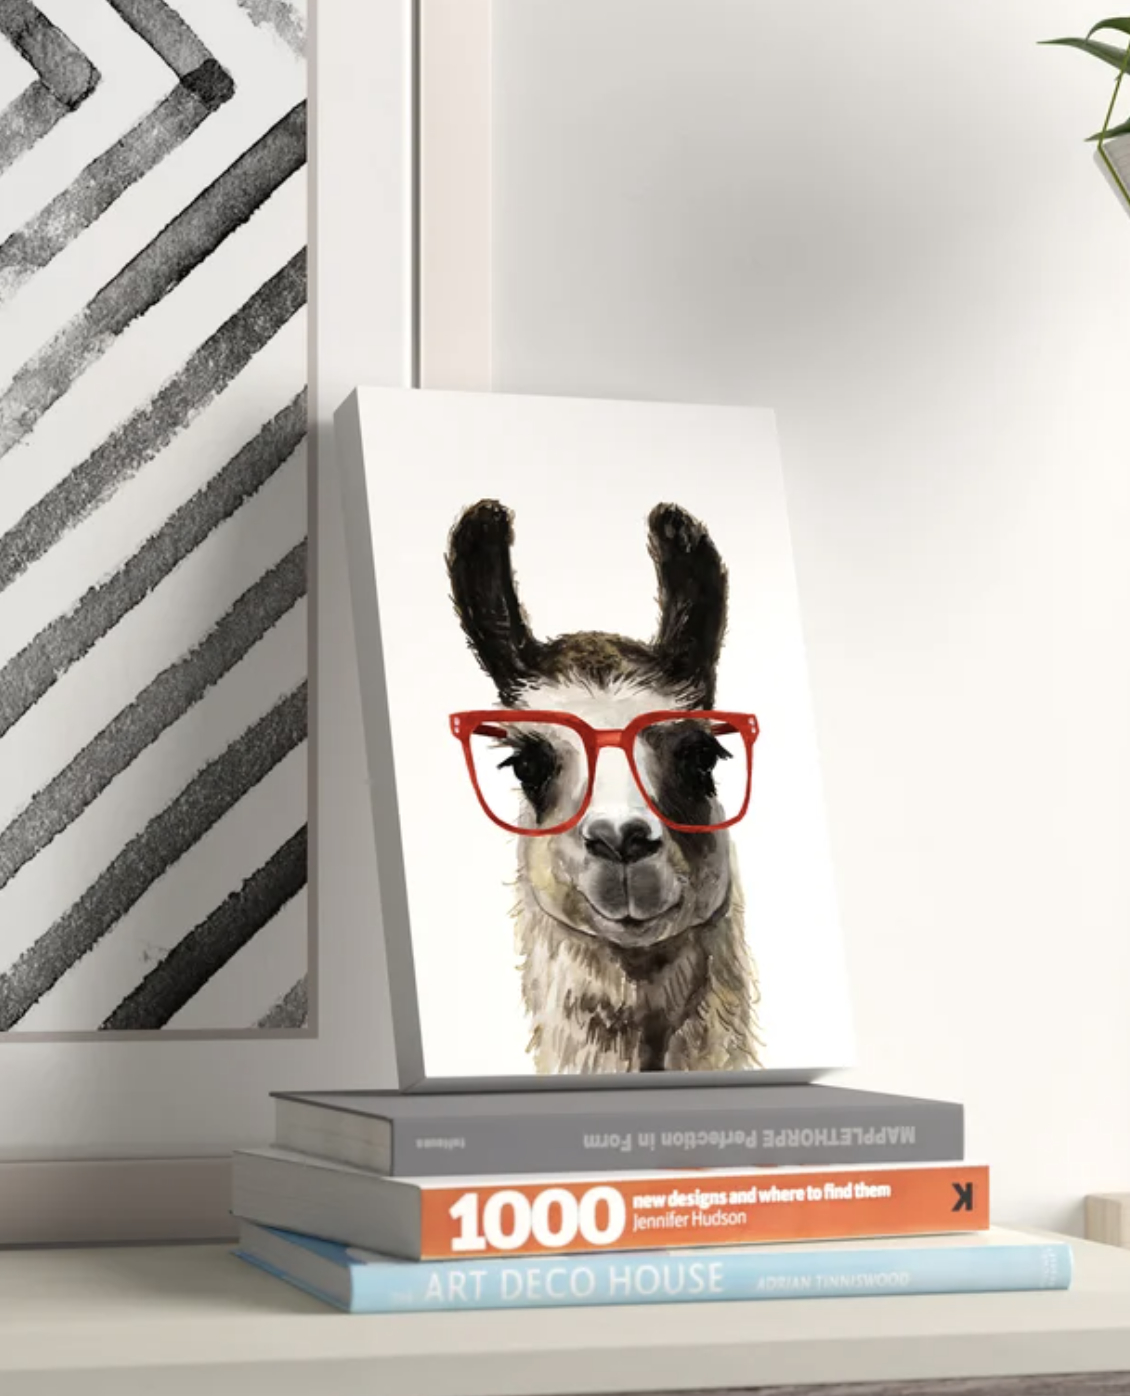 Print of a llama with red glasses, set on a bookshelf beside a stack of books